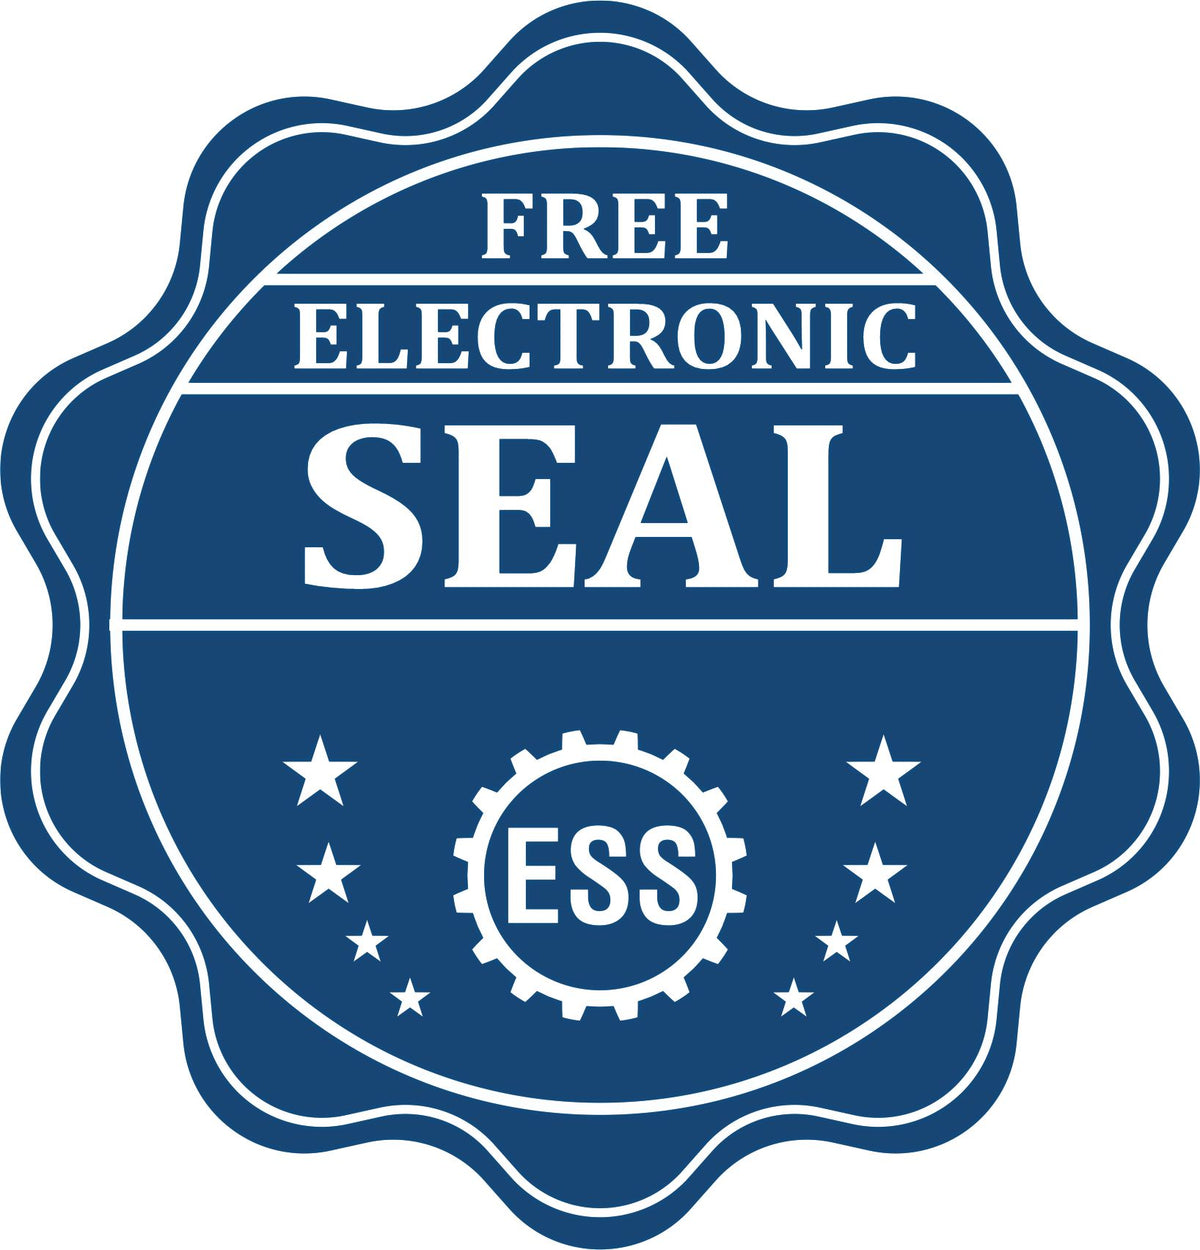 A badge showing a free electronic seal for the Soft Pocket Maryland Landscape Architect Embosser with stars and the ESS gear on the emblem.